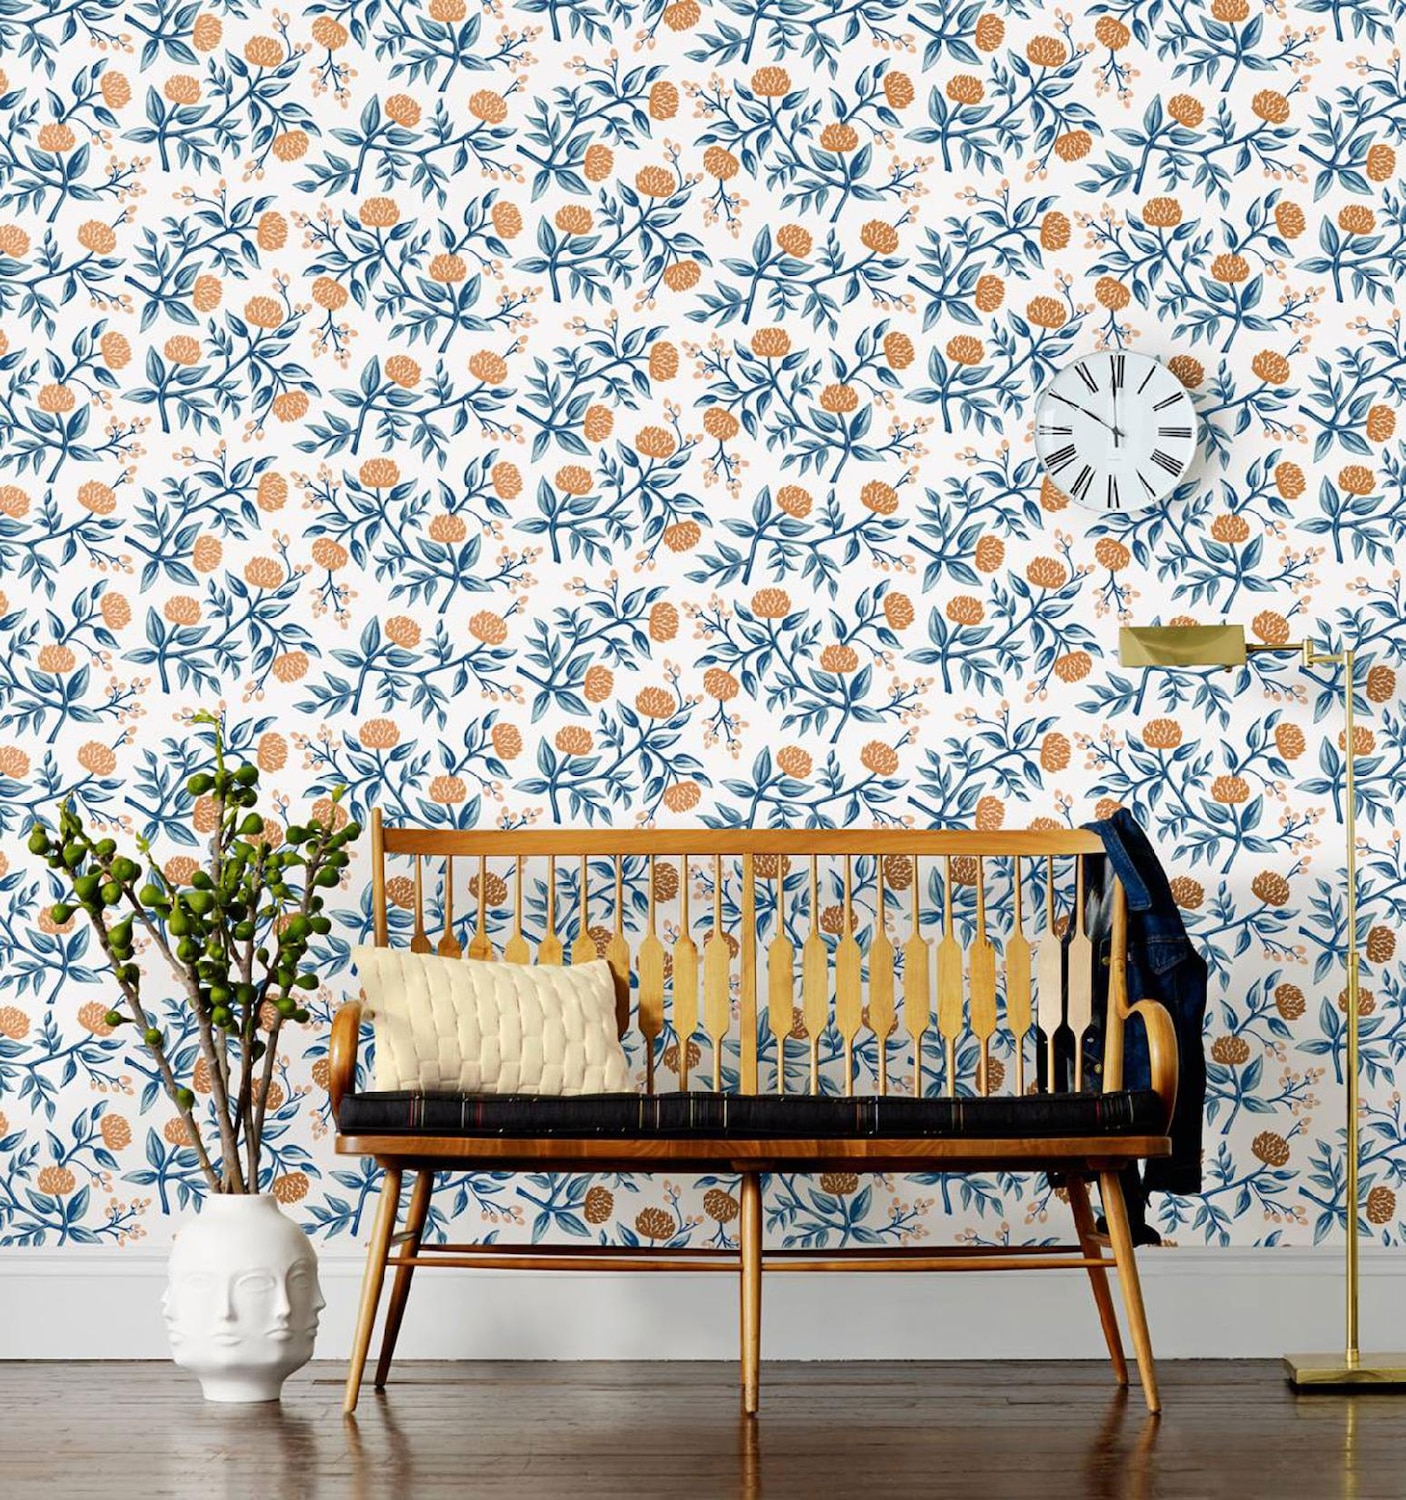 Whimsical Wallpaper That Make A Statement Style At Home